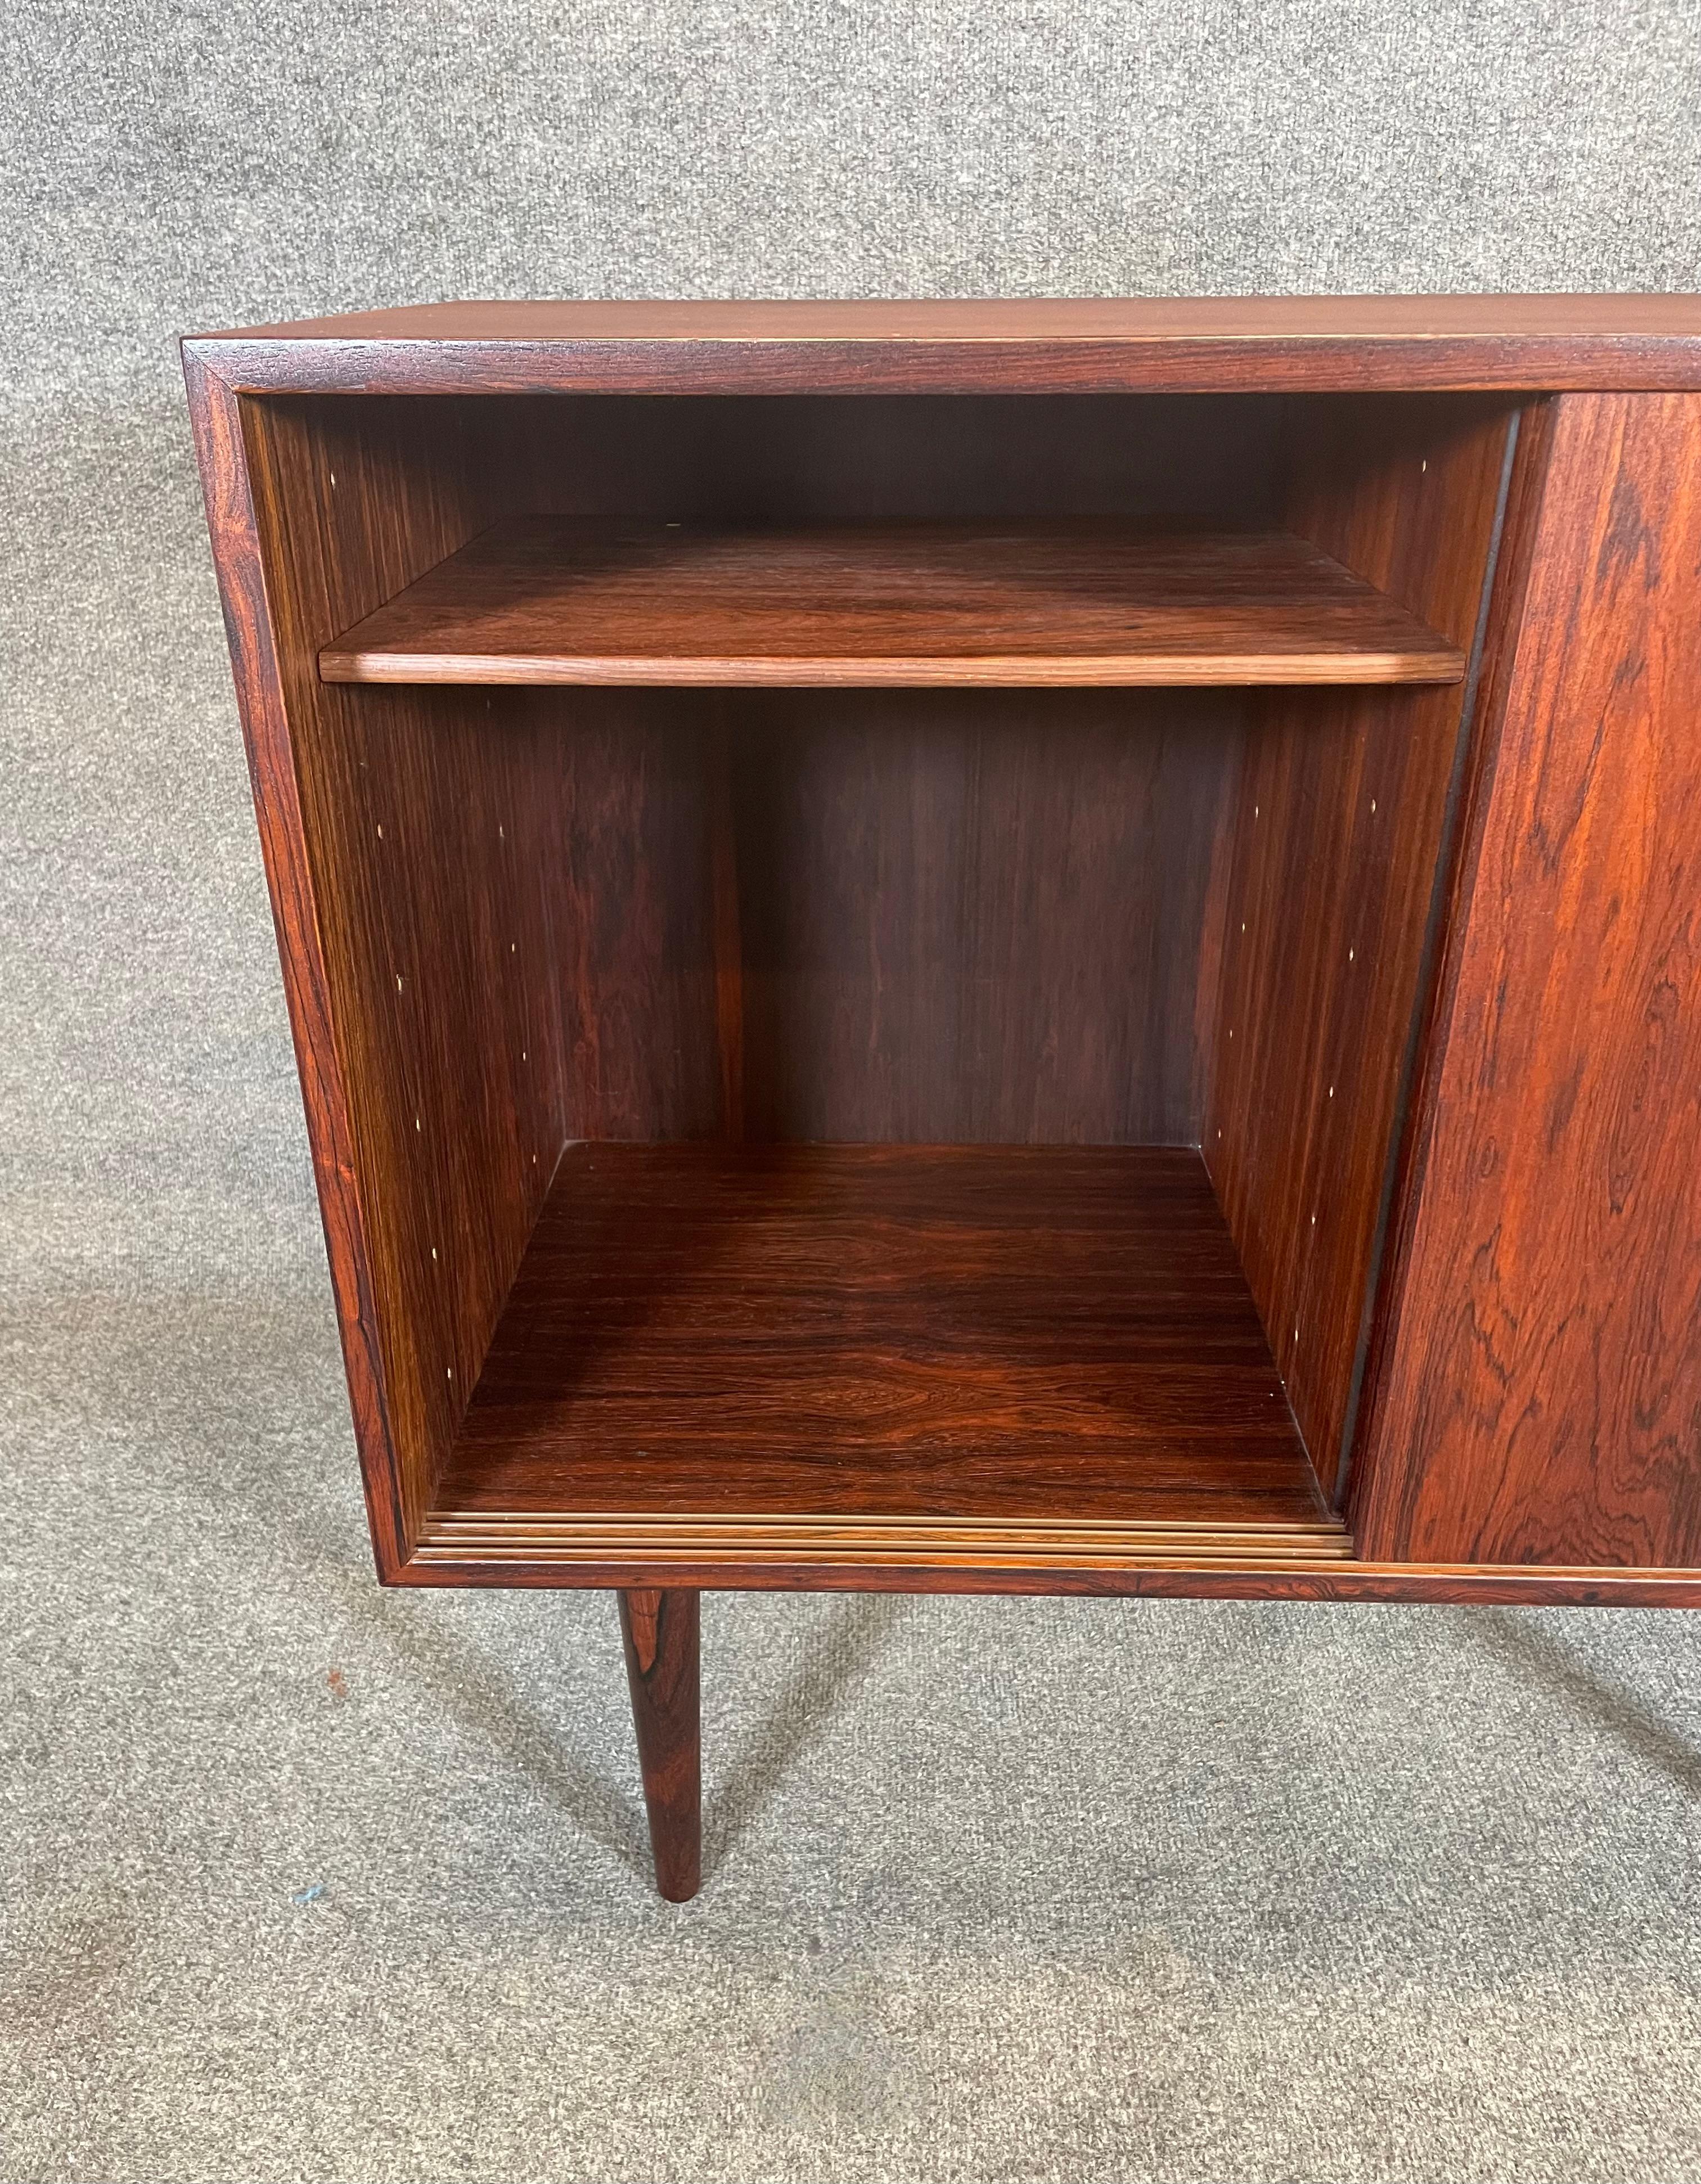 Vintage Danish Mid-Century Modern Rosewood Cabinet by Kai Kristiansen In Good Condition For Sale In San Marcos, CA